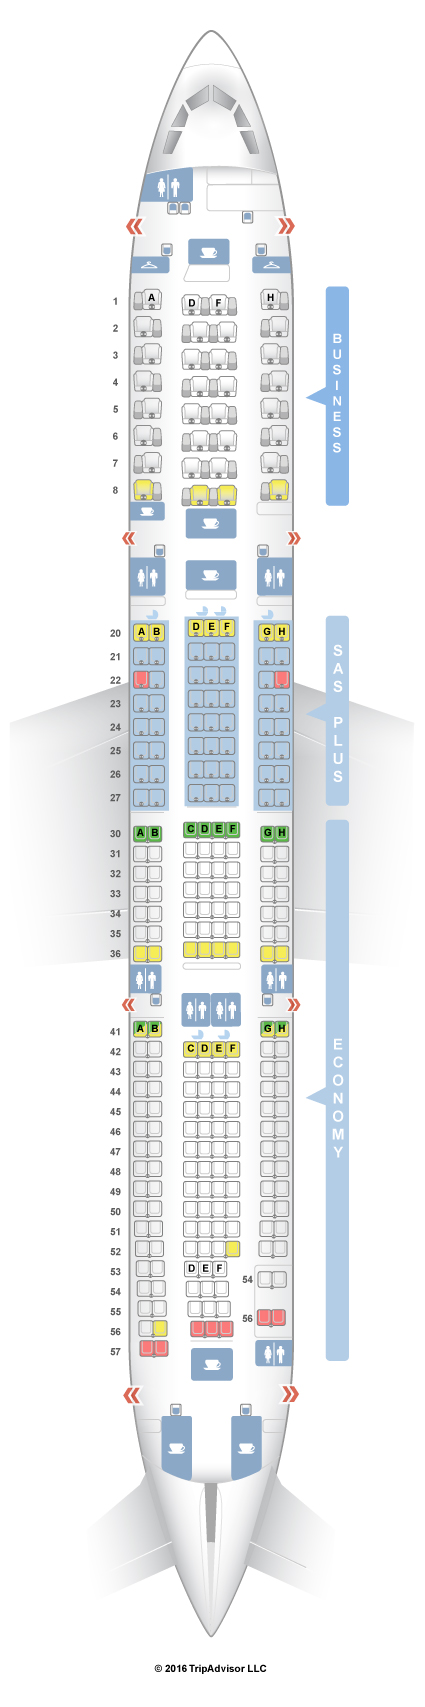 American Airlines Flight 953 Seating Chart